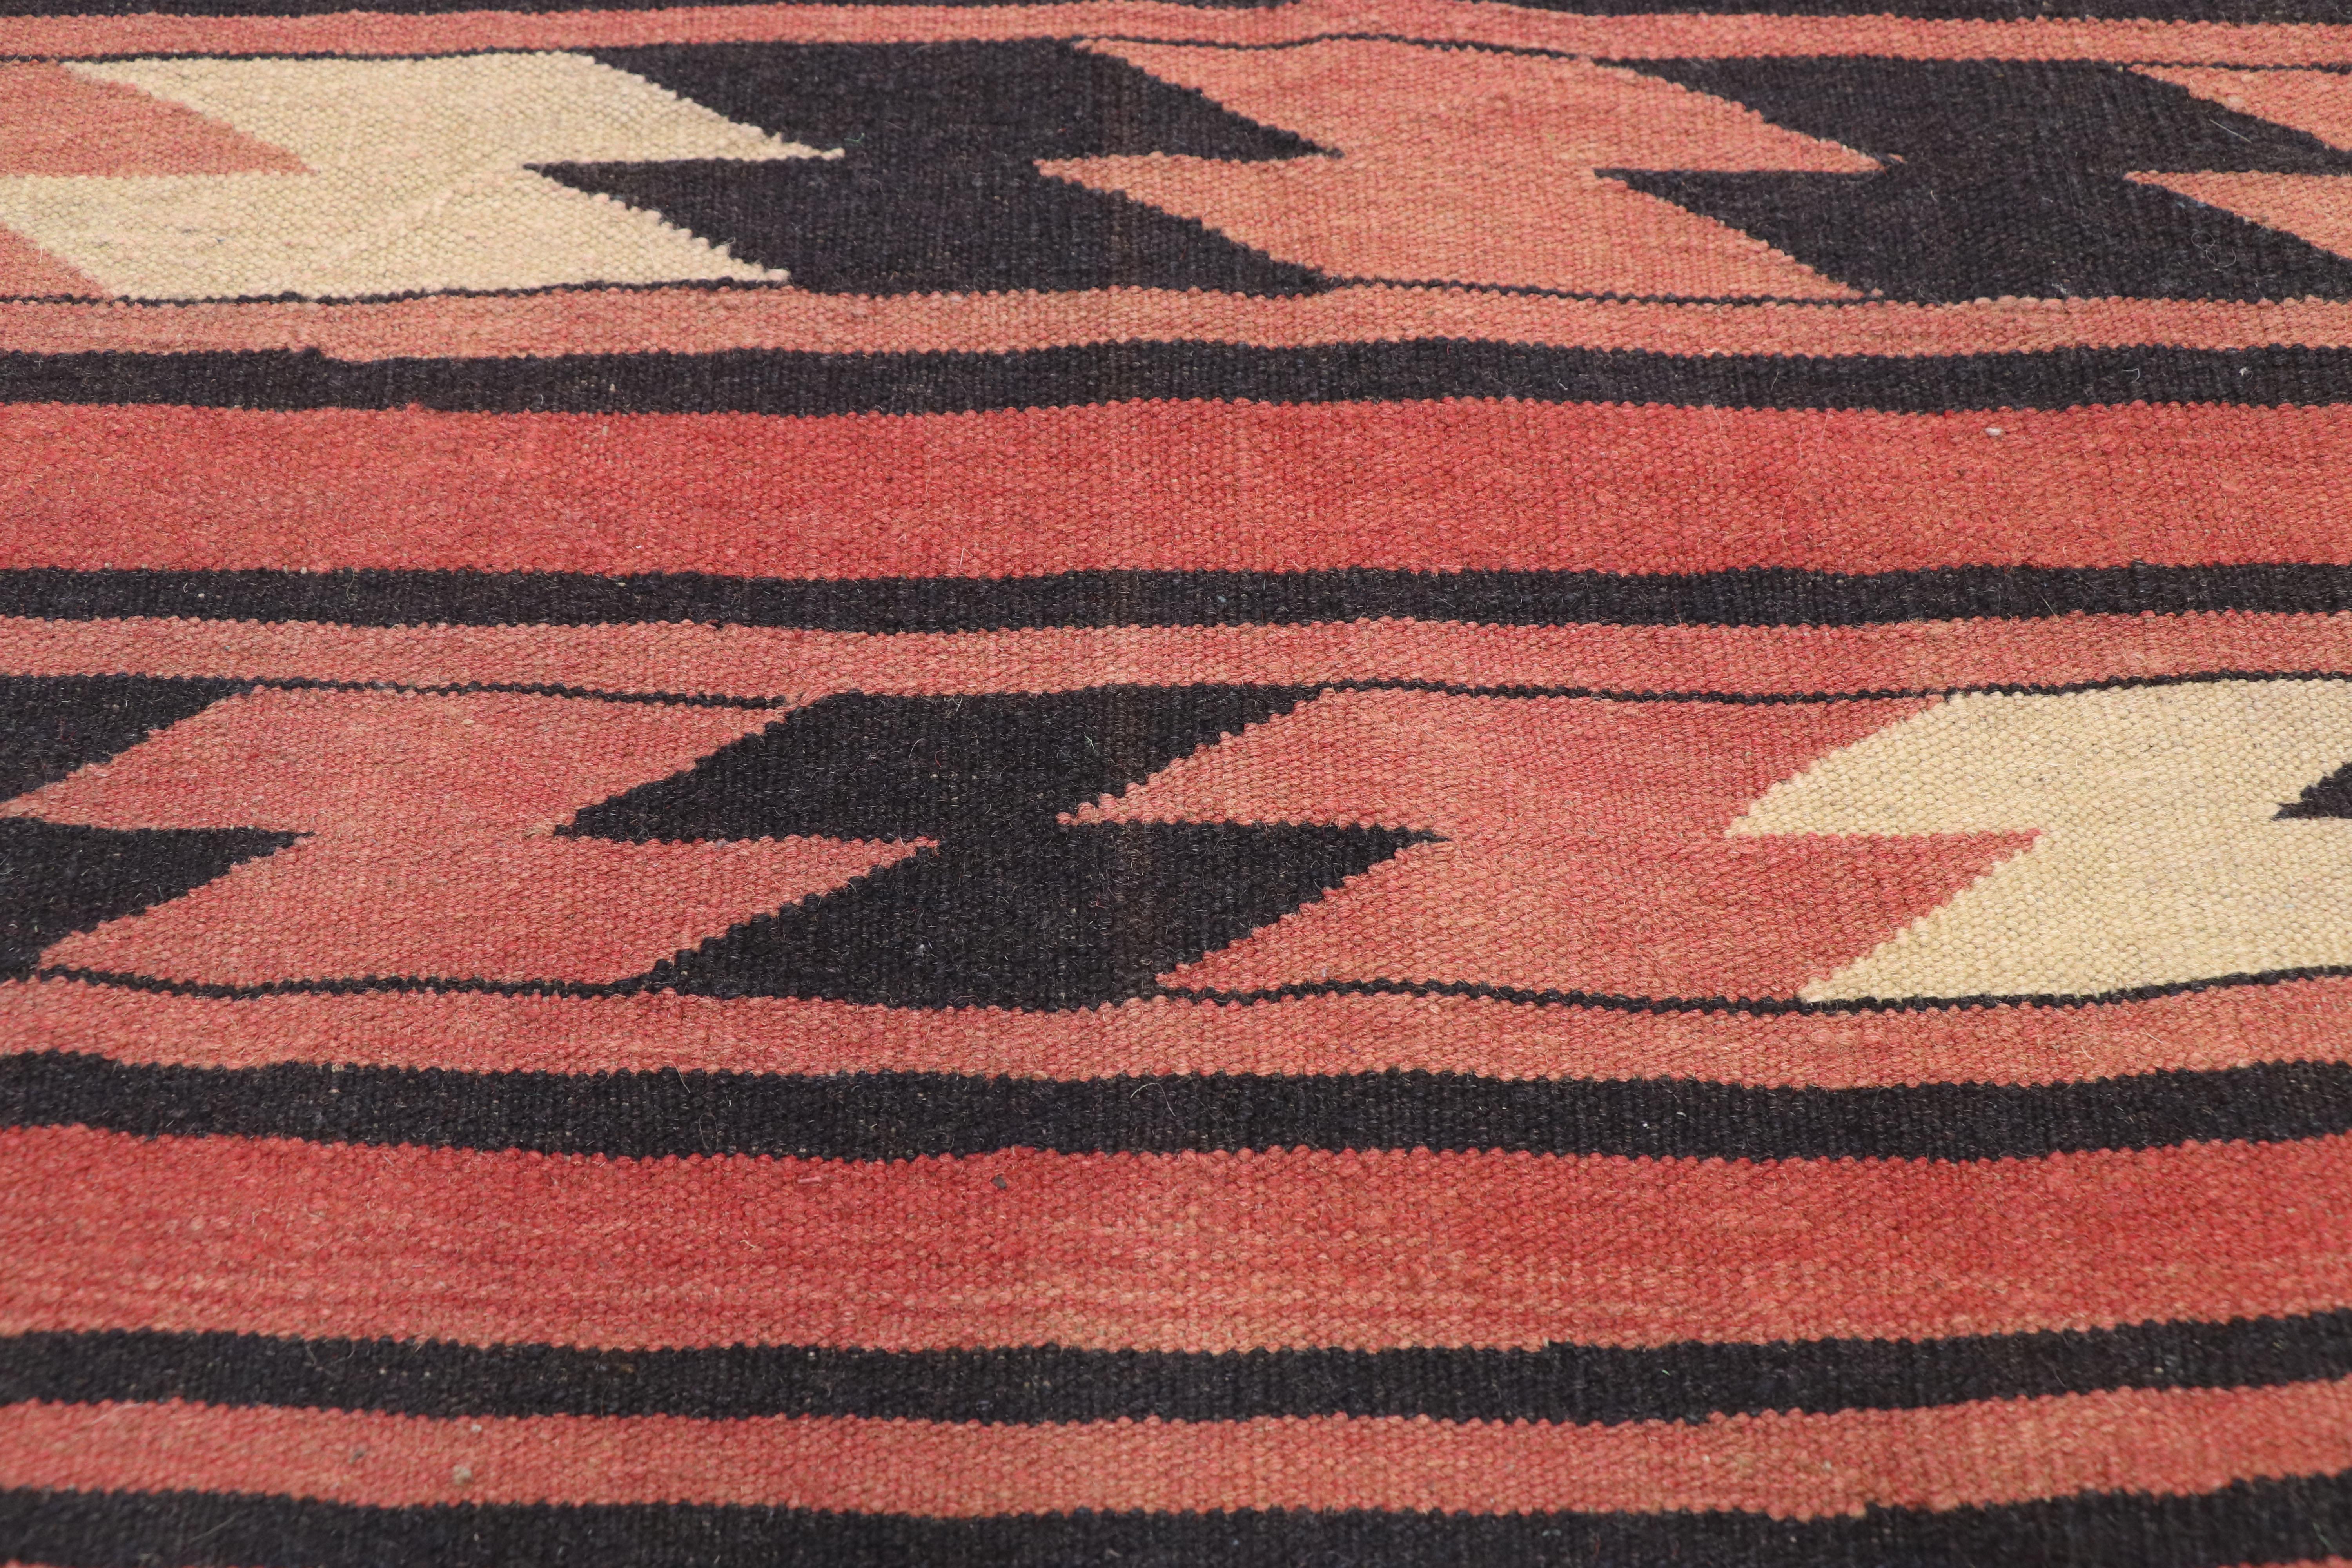 Vintage Afghani Kilim Rug with Checkerboard Design and Modern Tribal Style In Good Condition For Sale In Dallas, TX